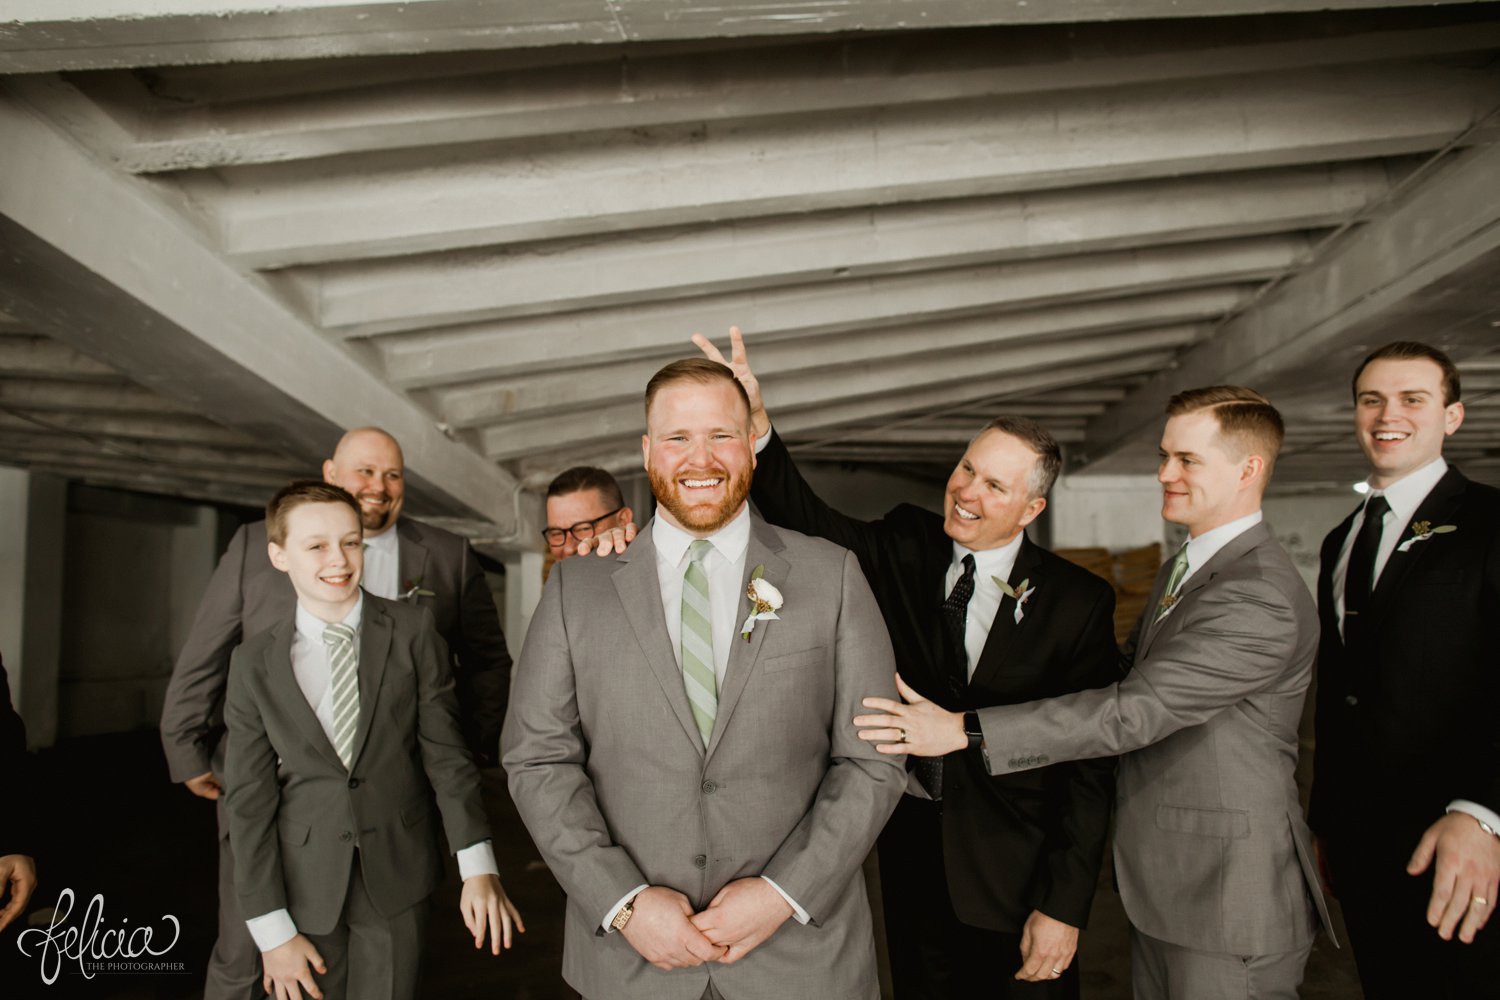 images by feliciathephotographer.com | magnolia venue | urban garden wedding | photographer | kansas city missouri | candid | concrete | the groomsmen suit | grey and green | wild hill flowers | family | industrial | silly | 